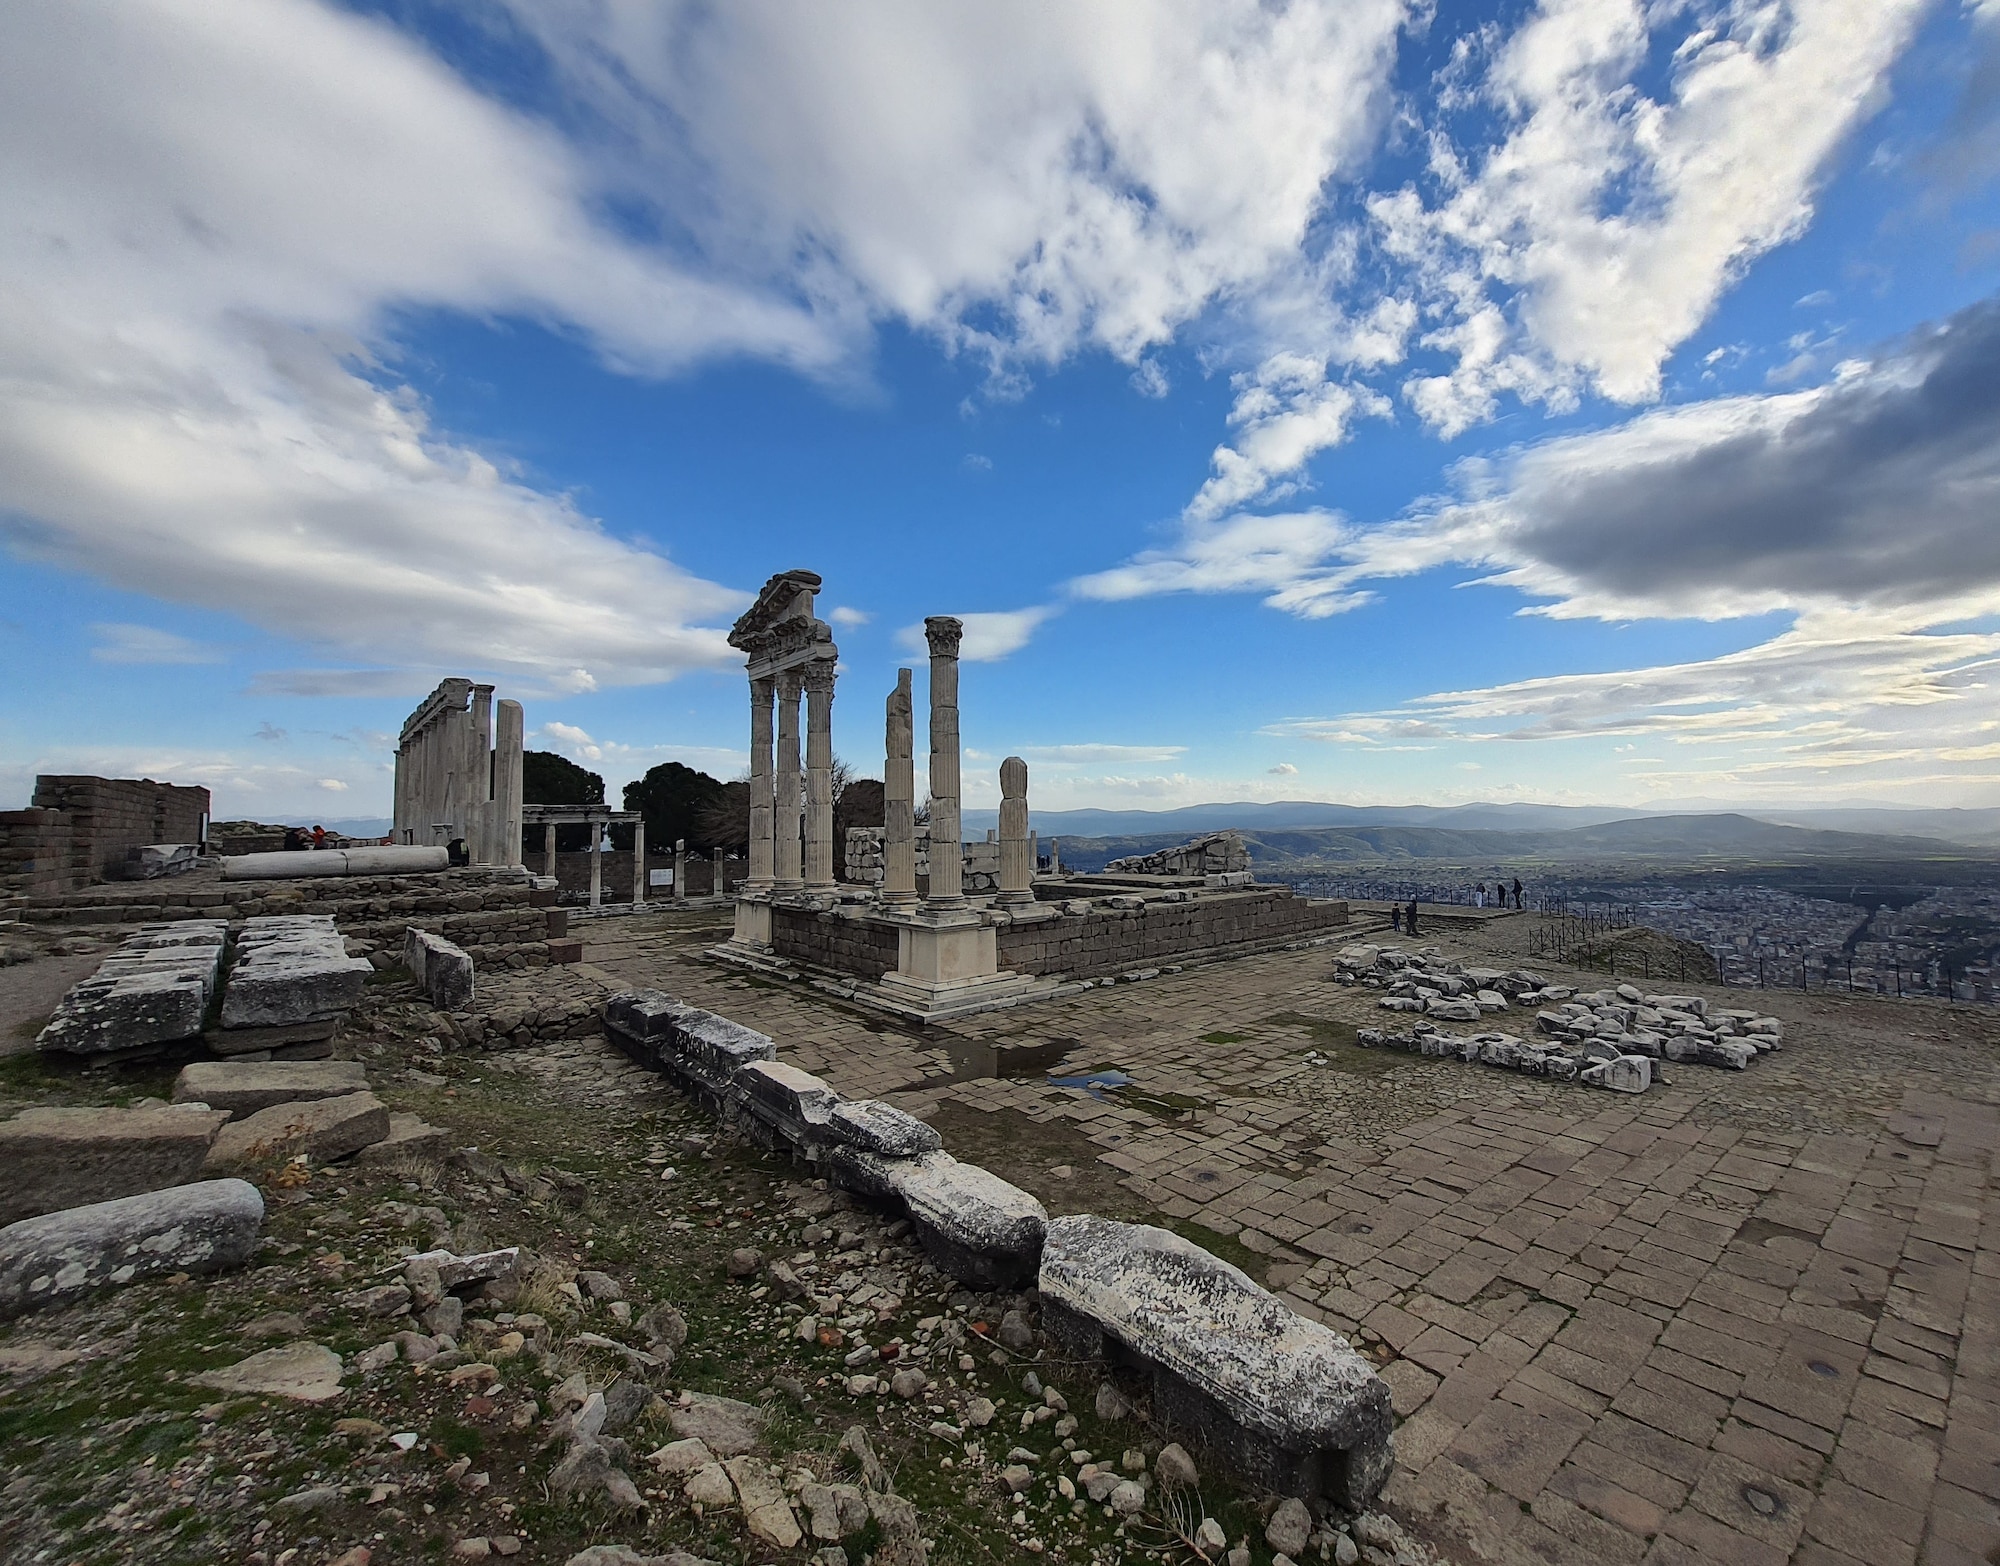 A view of the acropolis of Pergamon, the city of many firsts, Jan. 21, 2023.